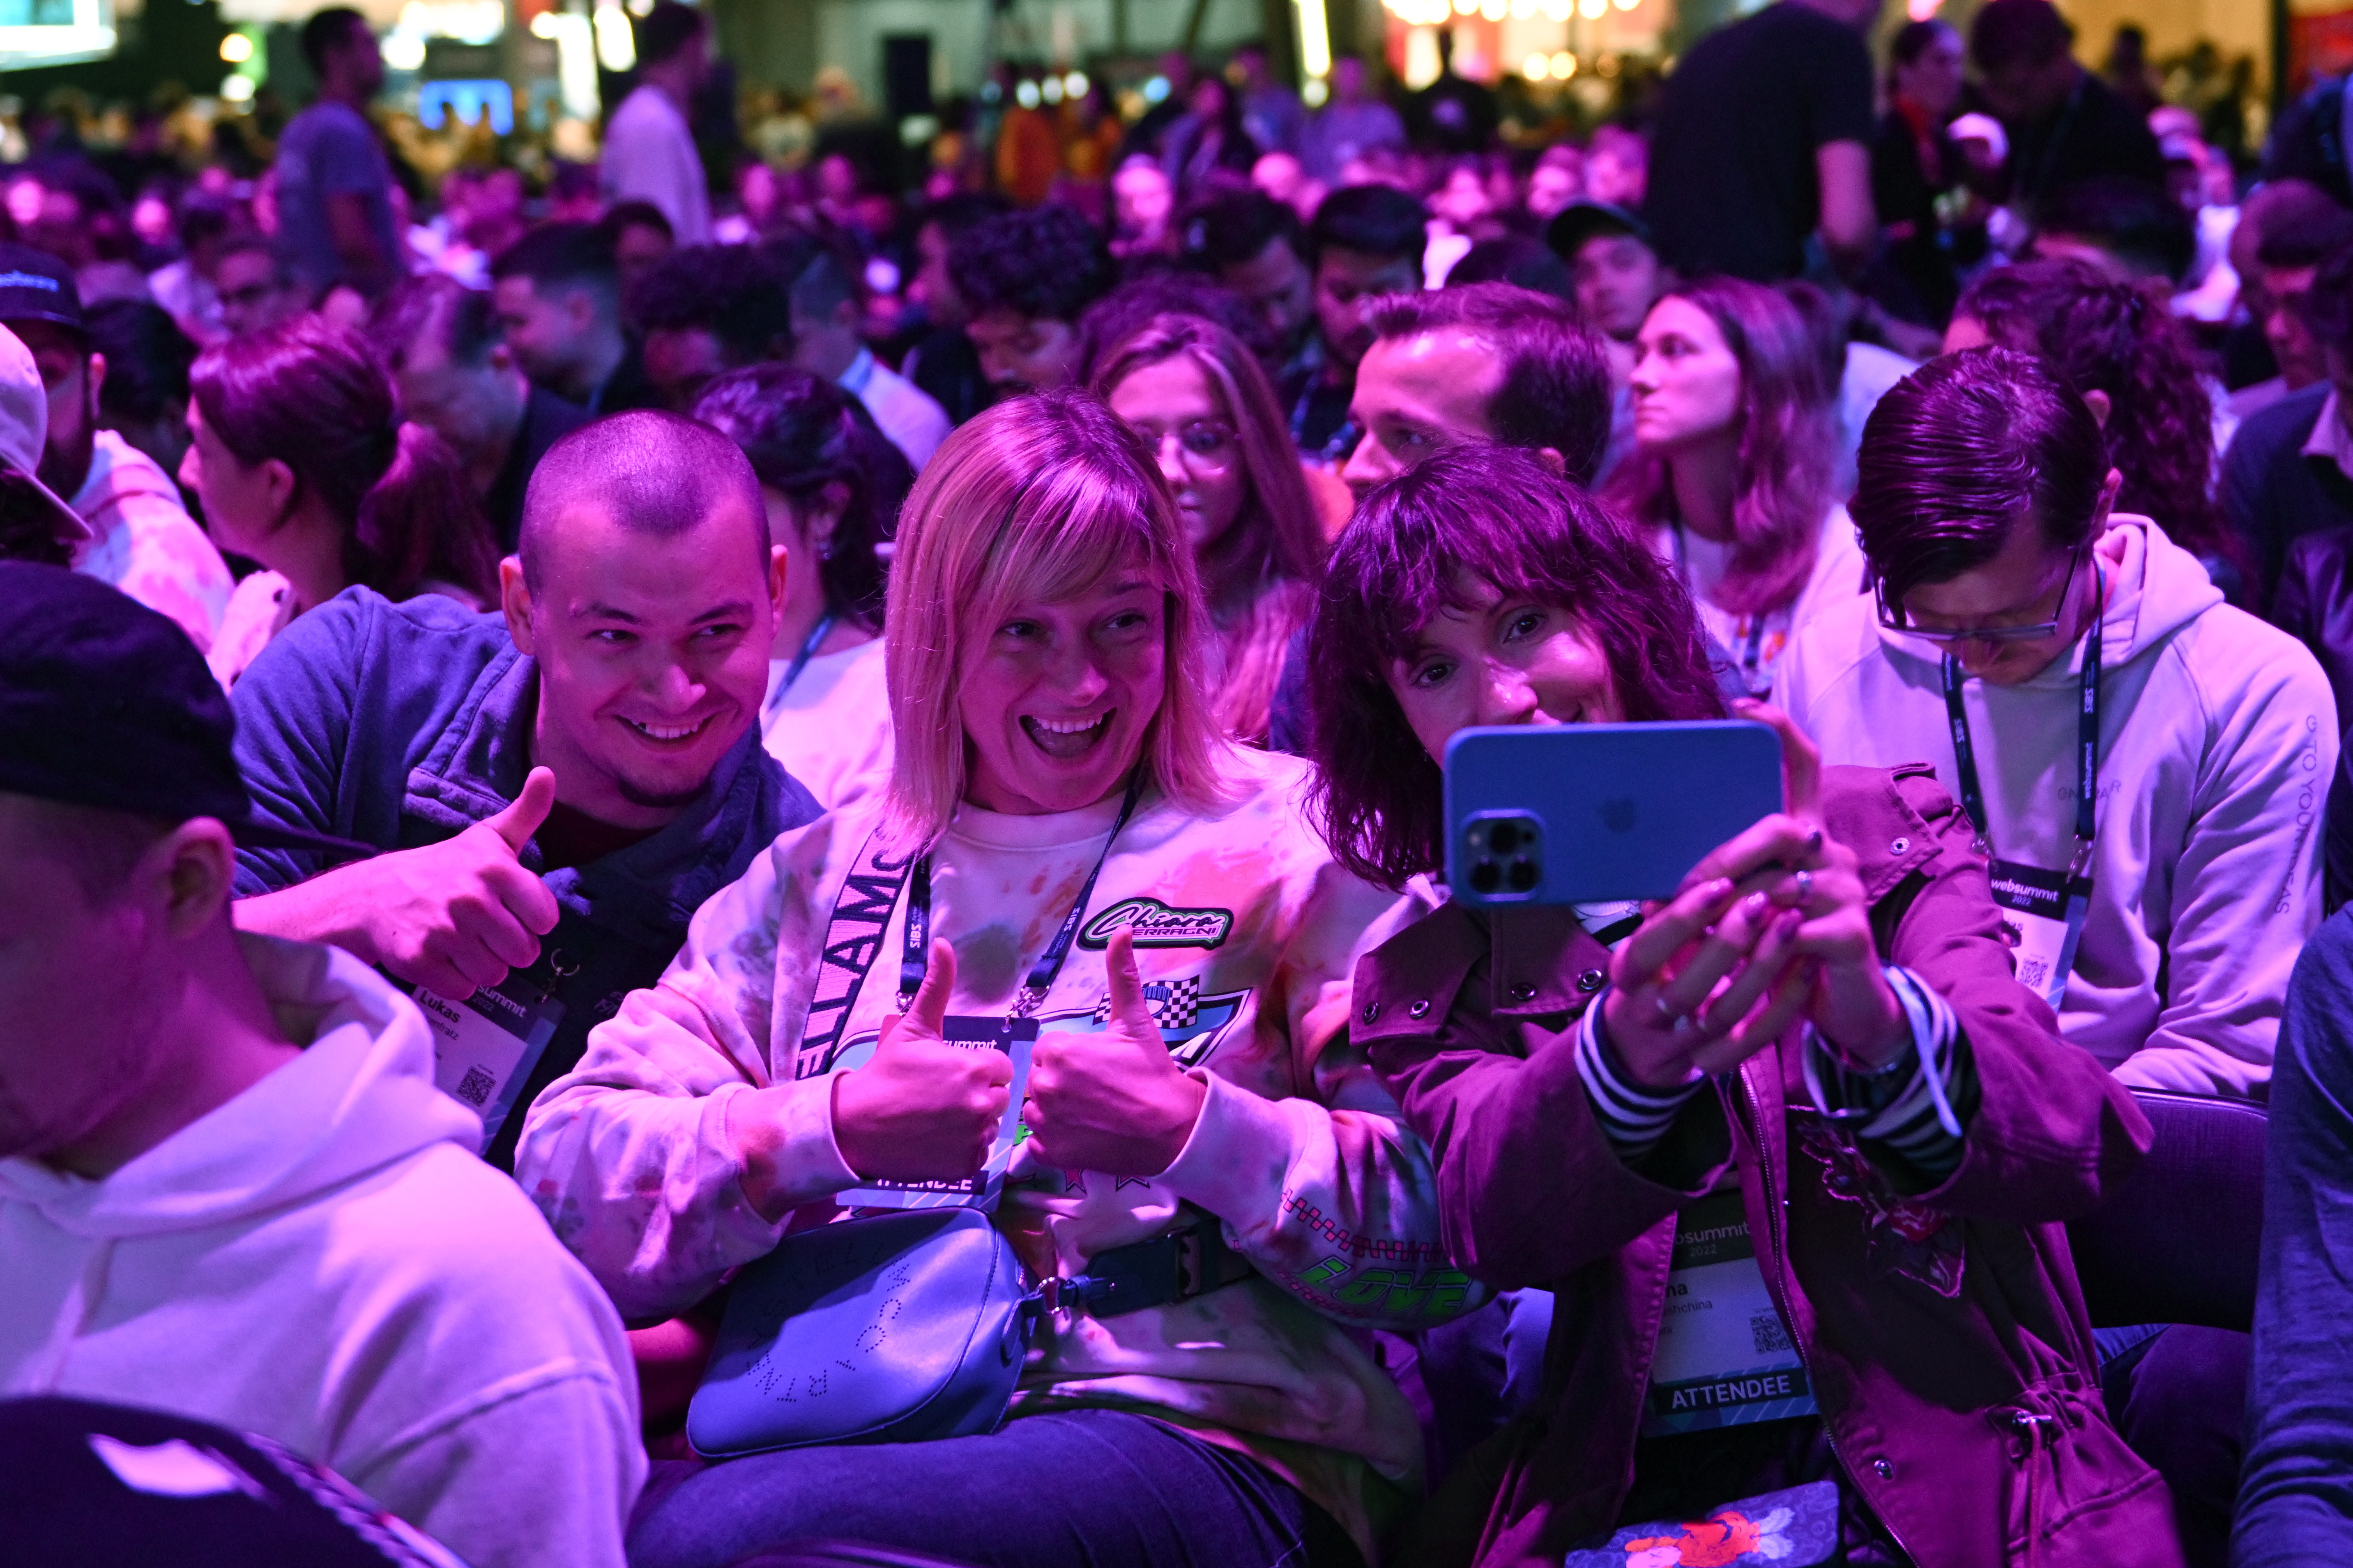 Three attendees at the front of a large crowd of seated people lean towards each other. One of these people is holding a mobile phone. The other two people are giving thumbs up. The three appear to be taking a selfie.